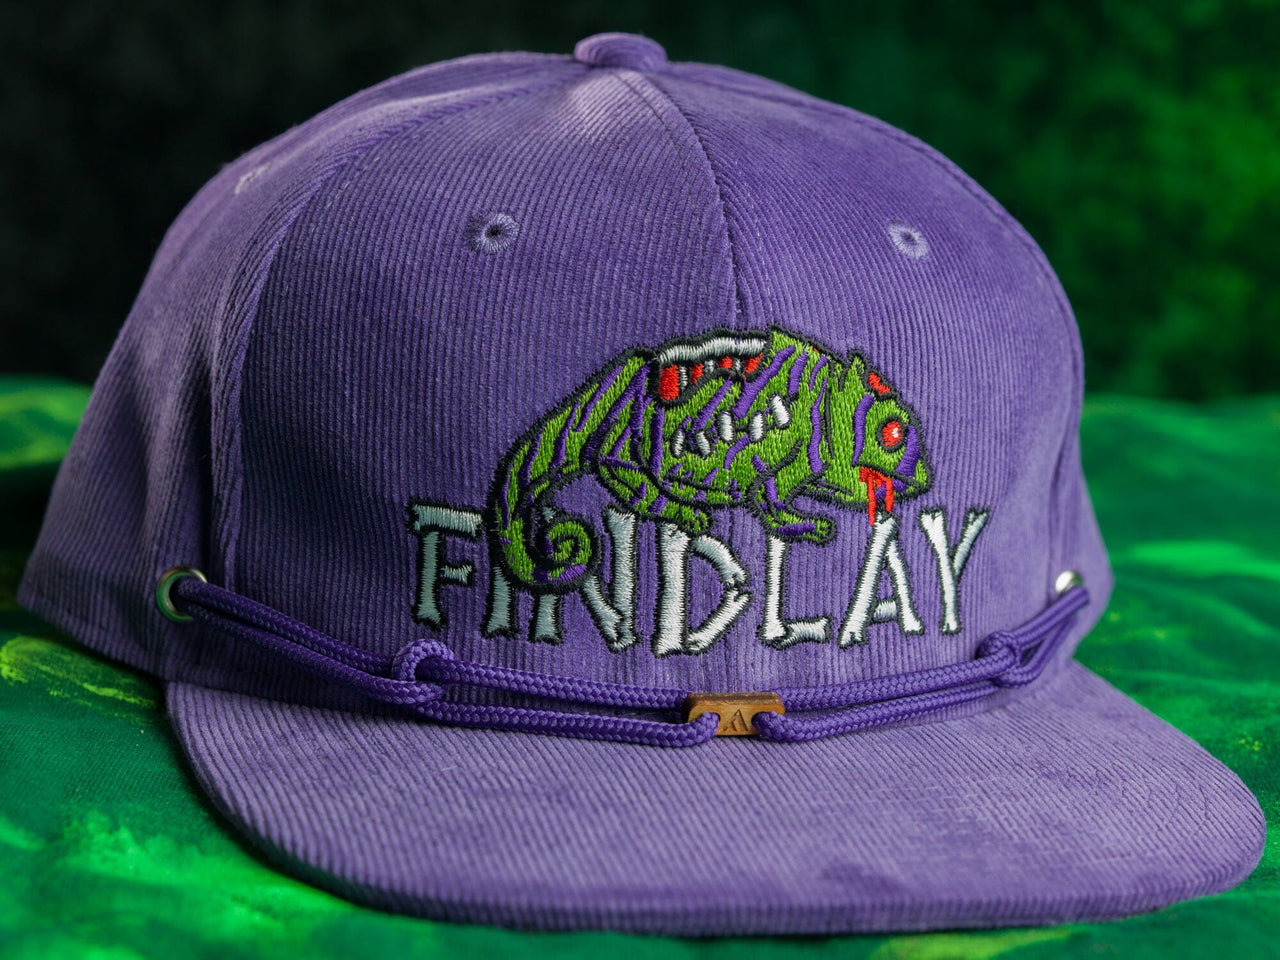 Veiled Zombie Chameleon (1 of 36) Limited Edition Hats Findlay Hats 